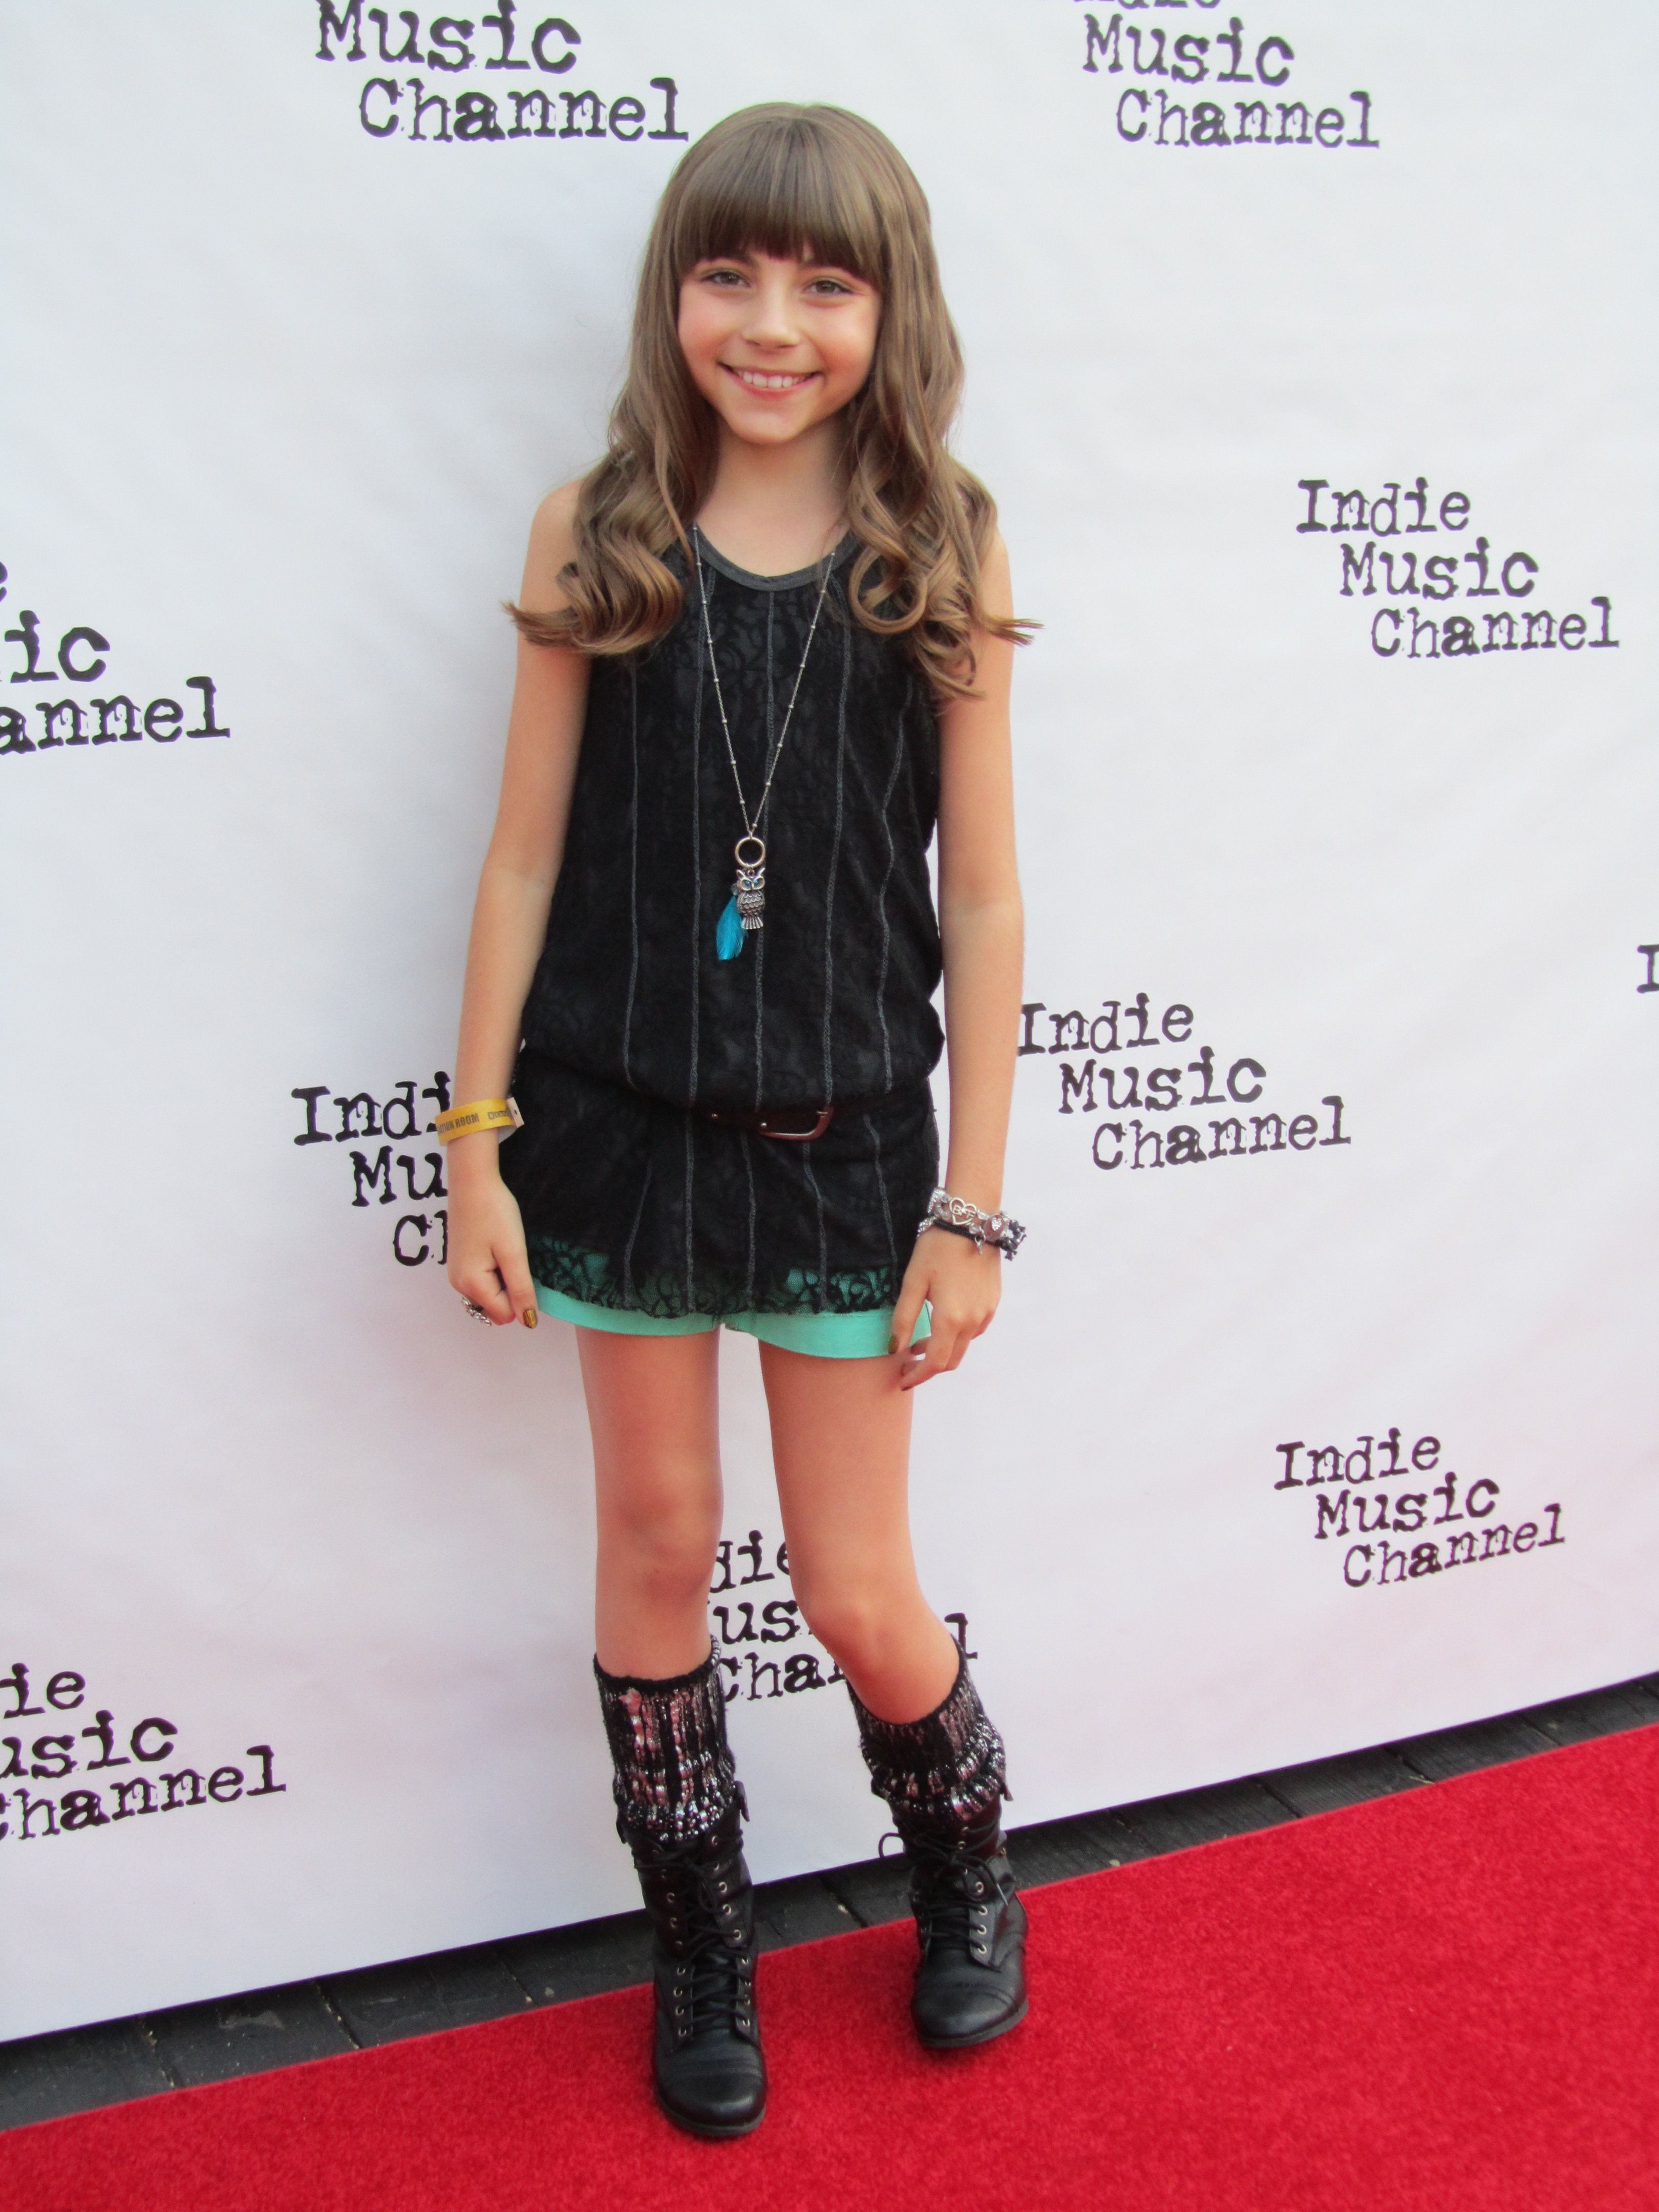 Jada Facer at the Indie Music Channel Awards 2012